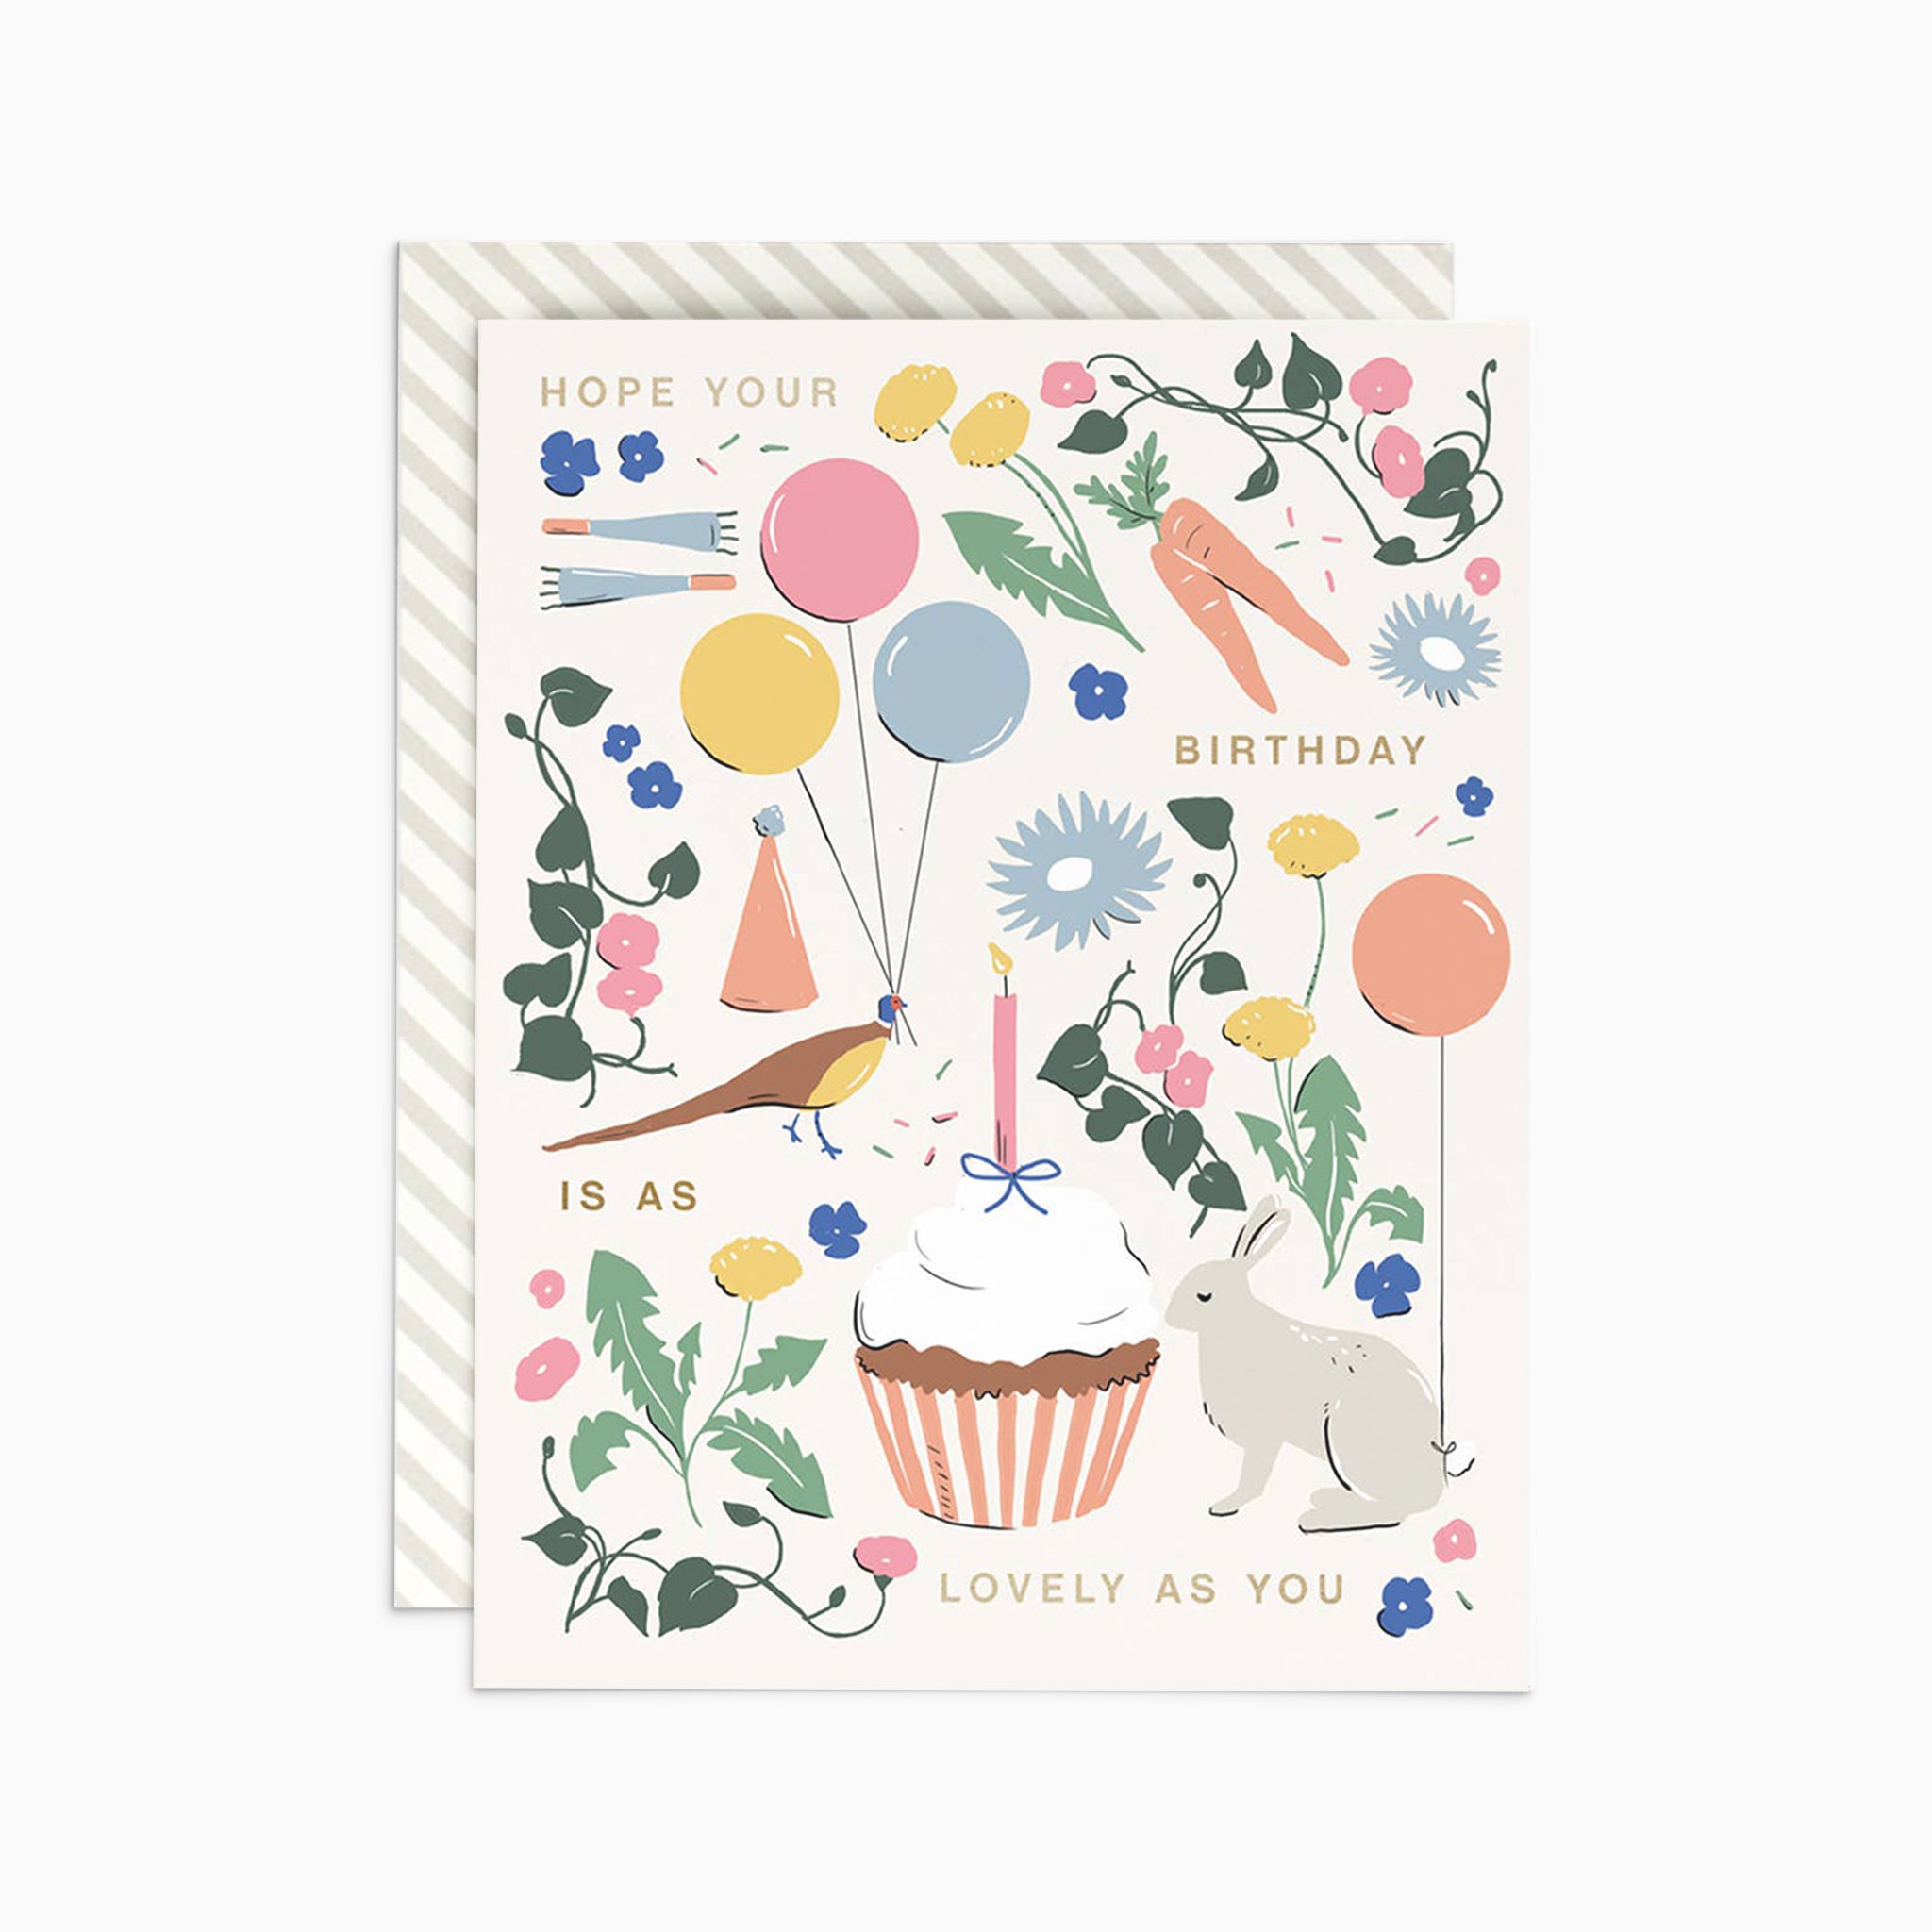 Illustrated 'As Lovely As You' Birthday Card featuring a vibrant mix of cupcakes, balloons, and garden florals on warm white cover cardstock, perfect for celebrating someone special.